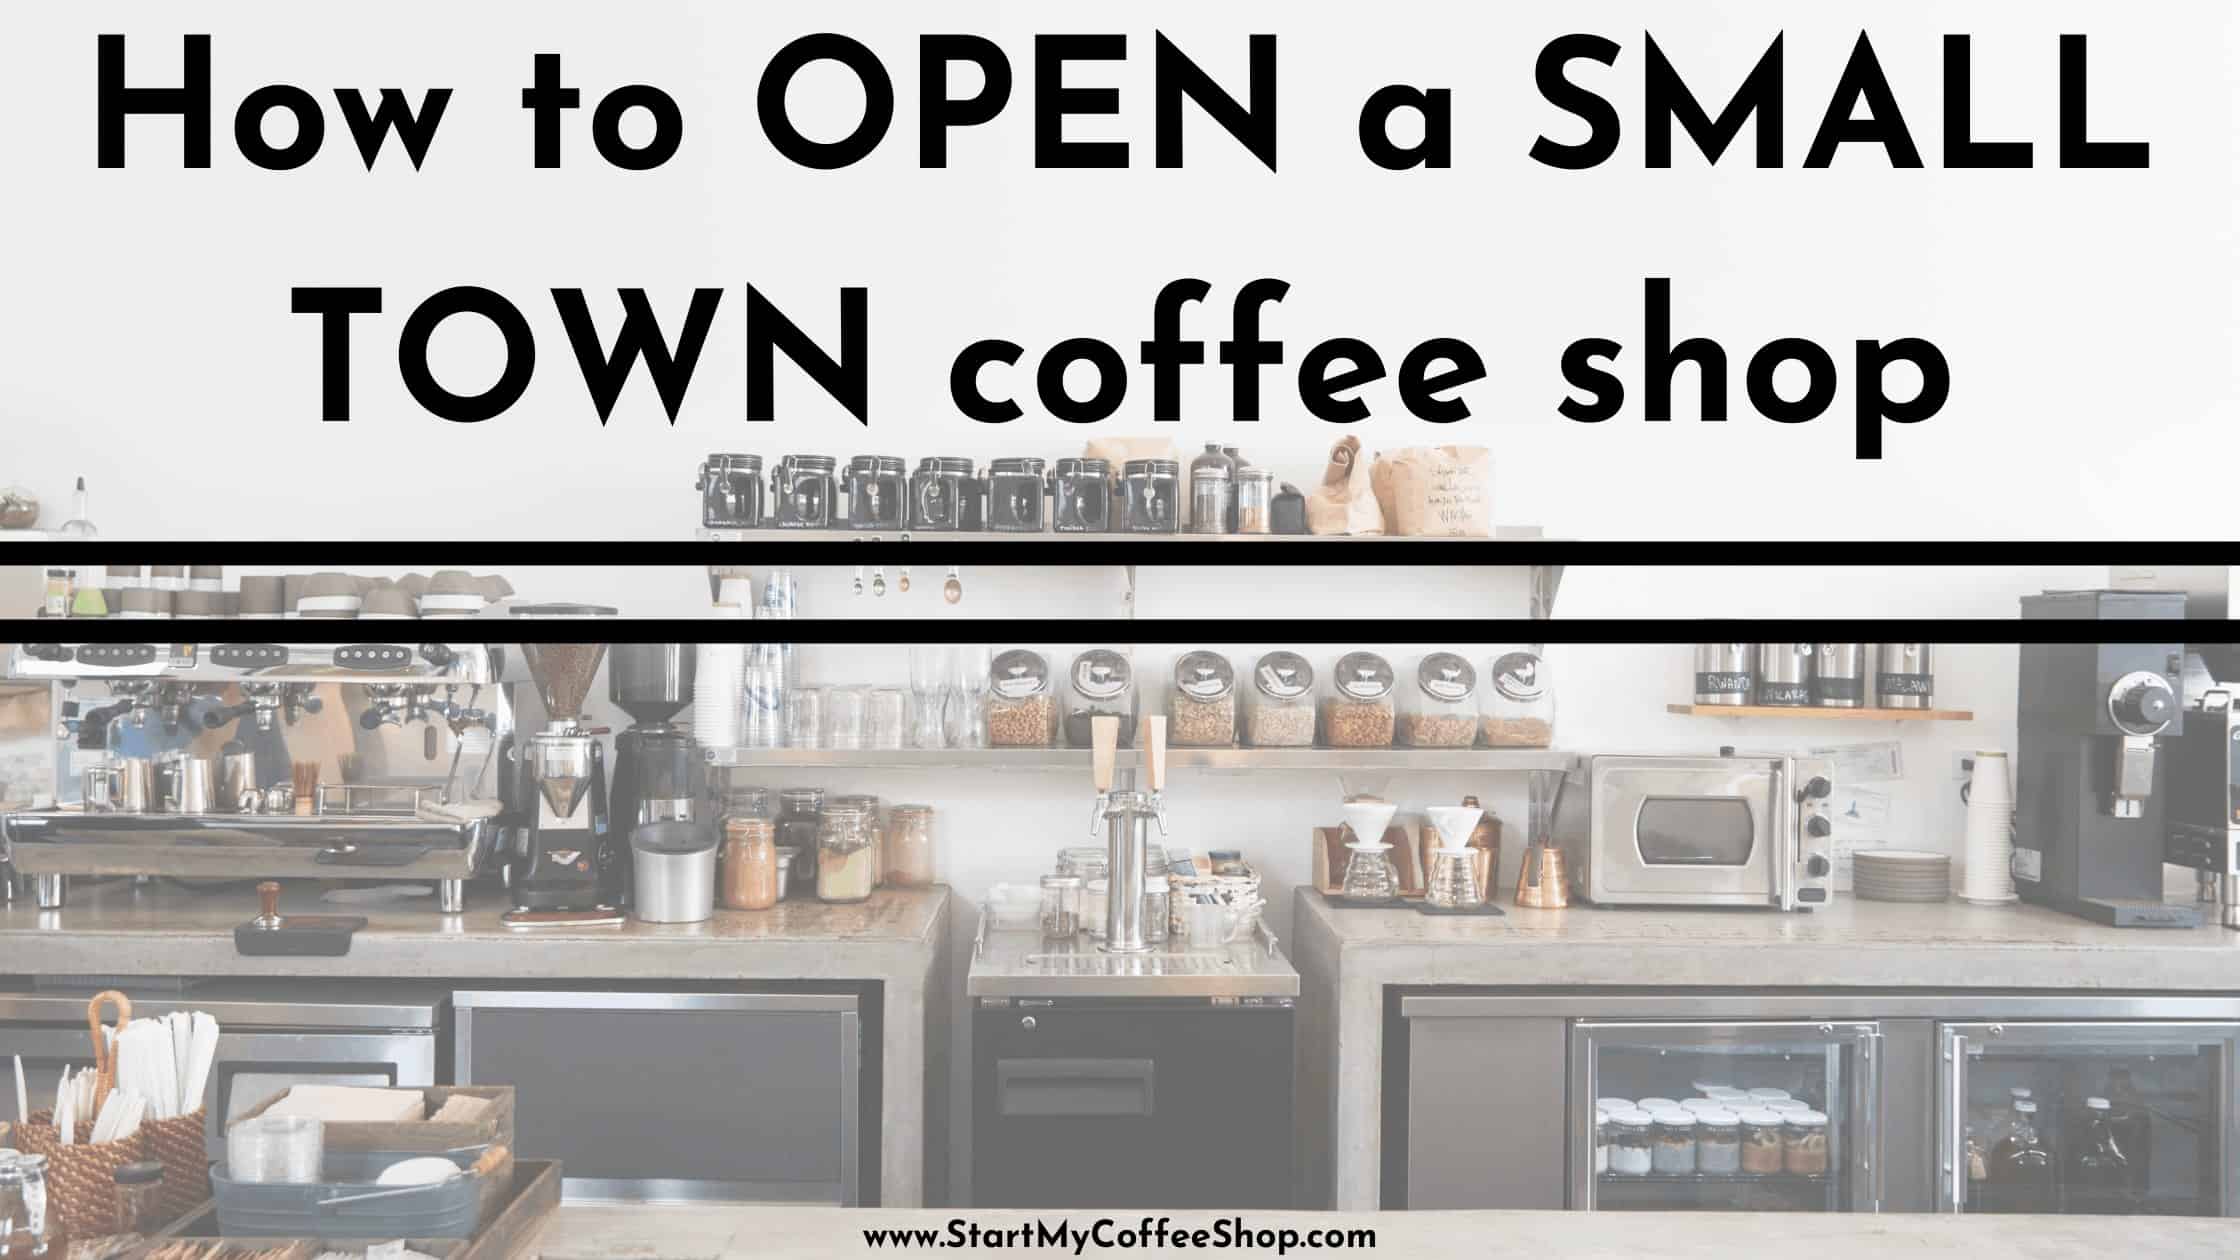 How to start a small town coffee shop